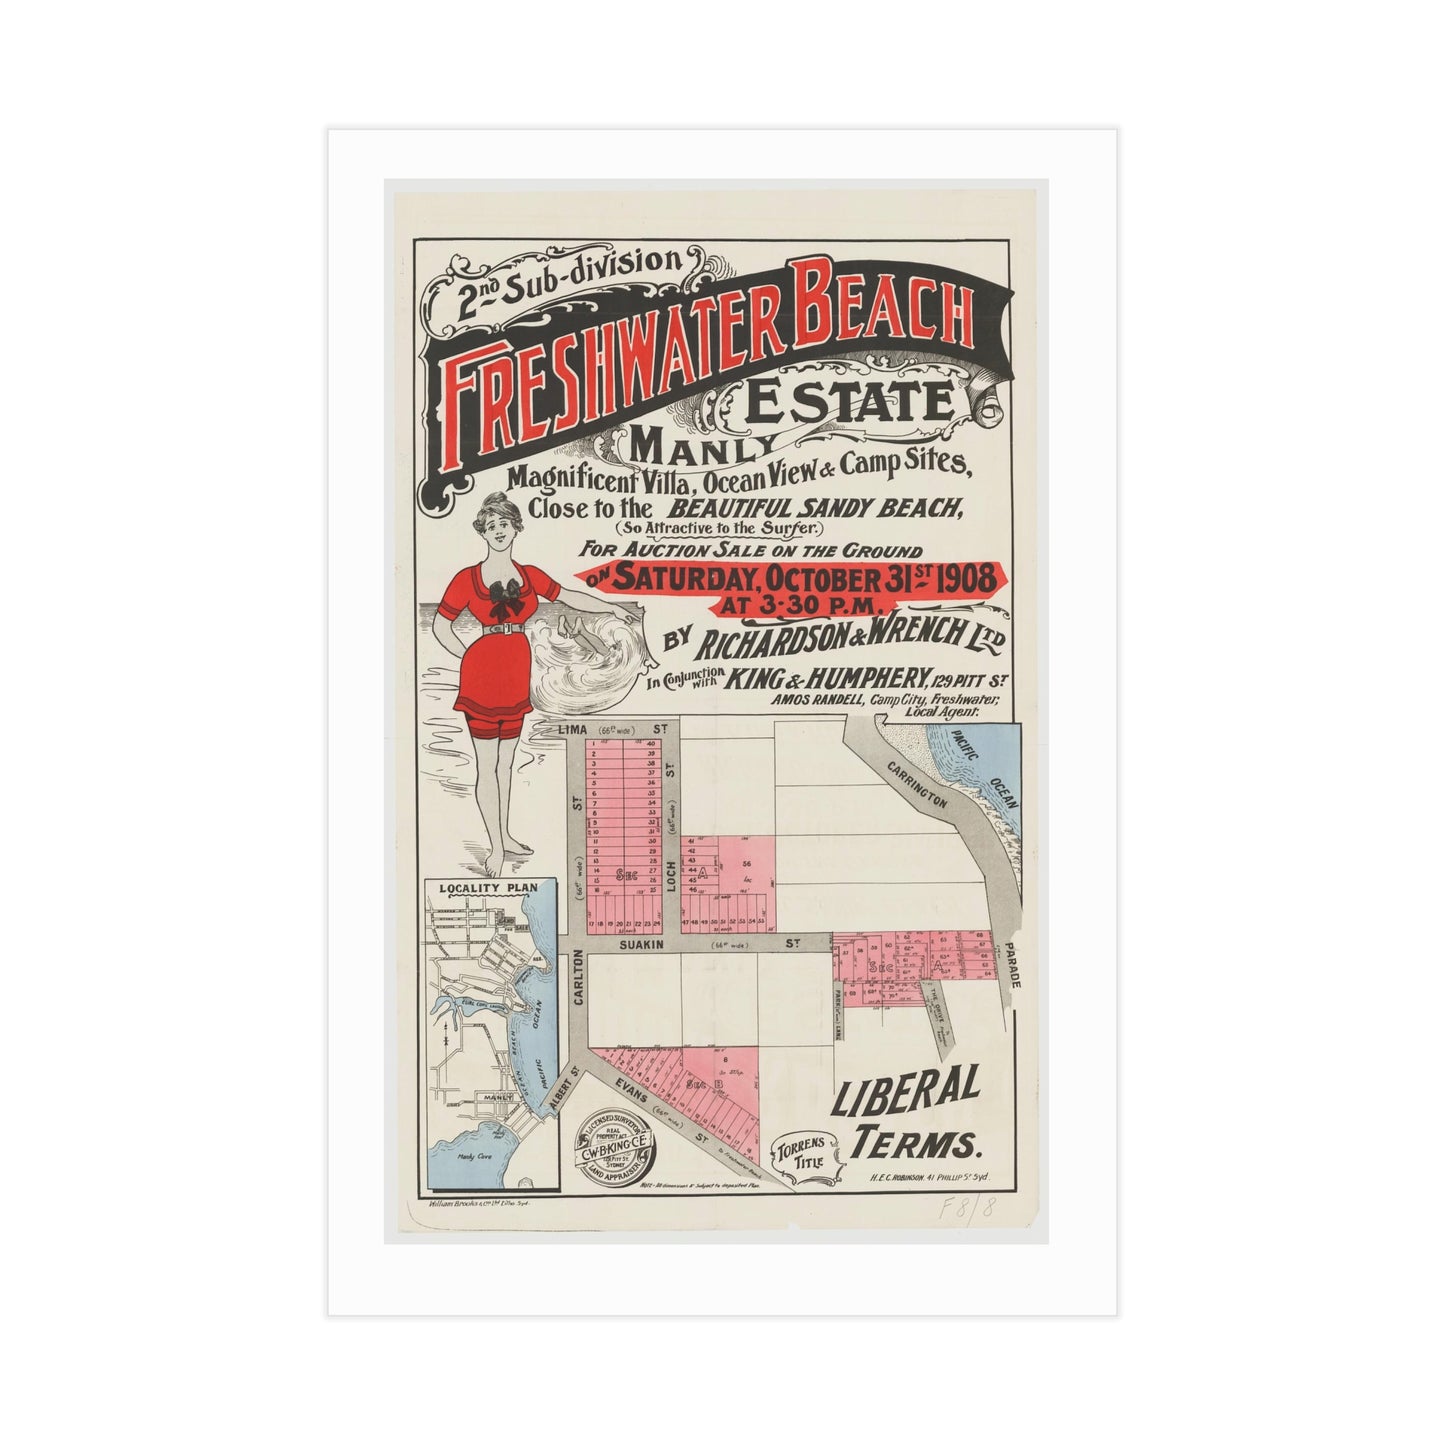 Freshwater Beach Subdivision Vintage Posters A3 size only